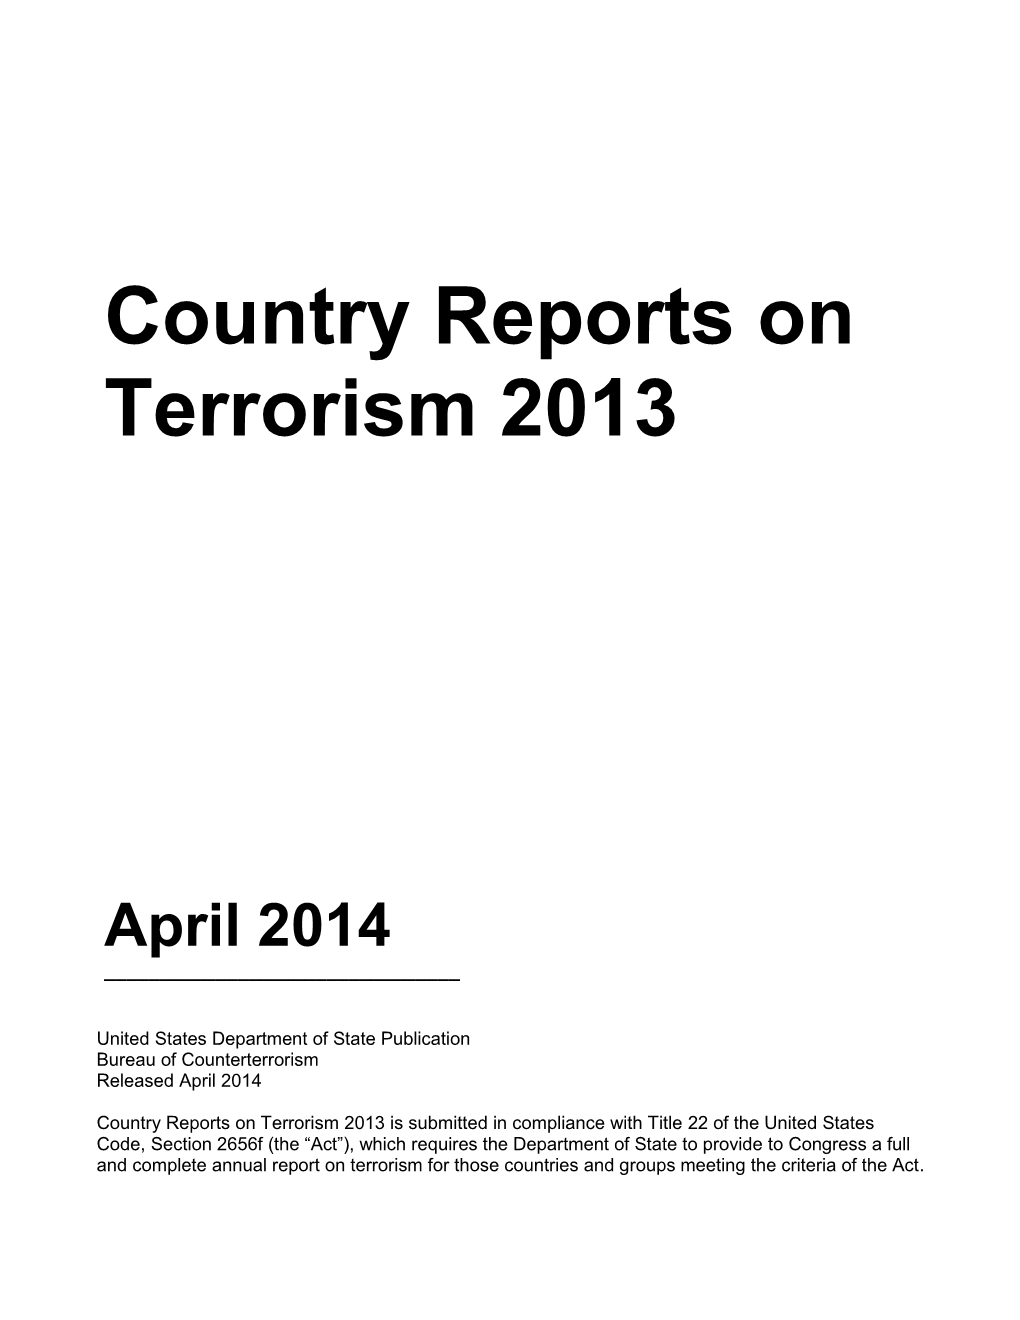 Country Reports on Terrorism 2013